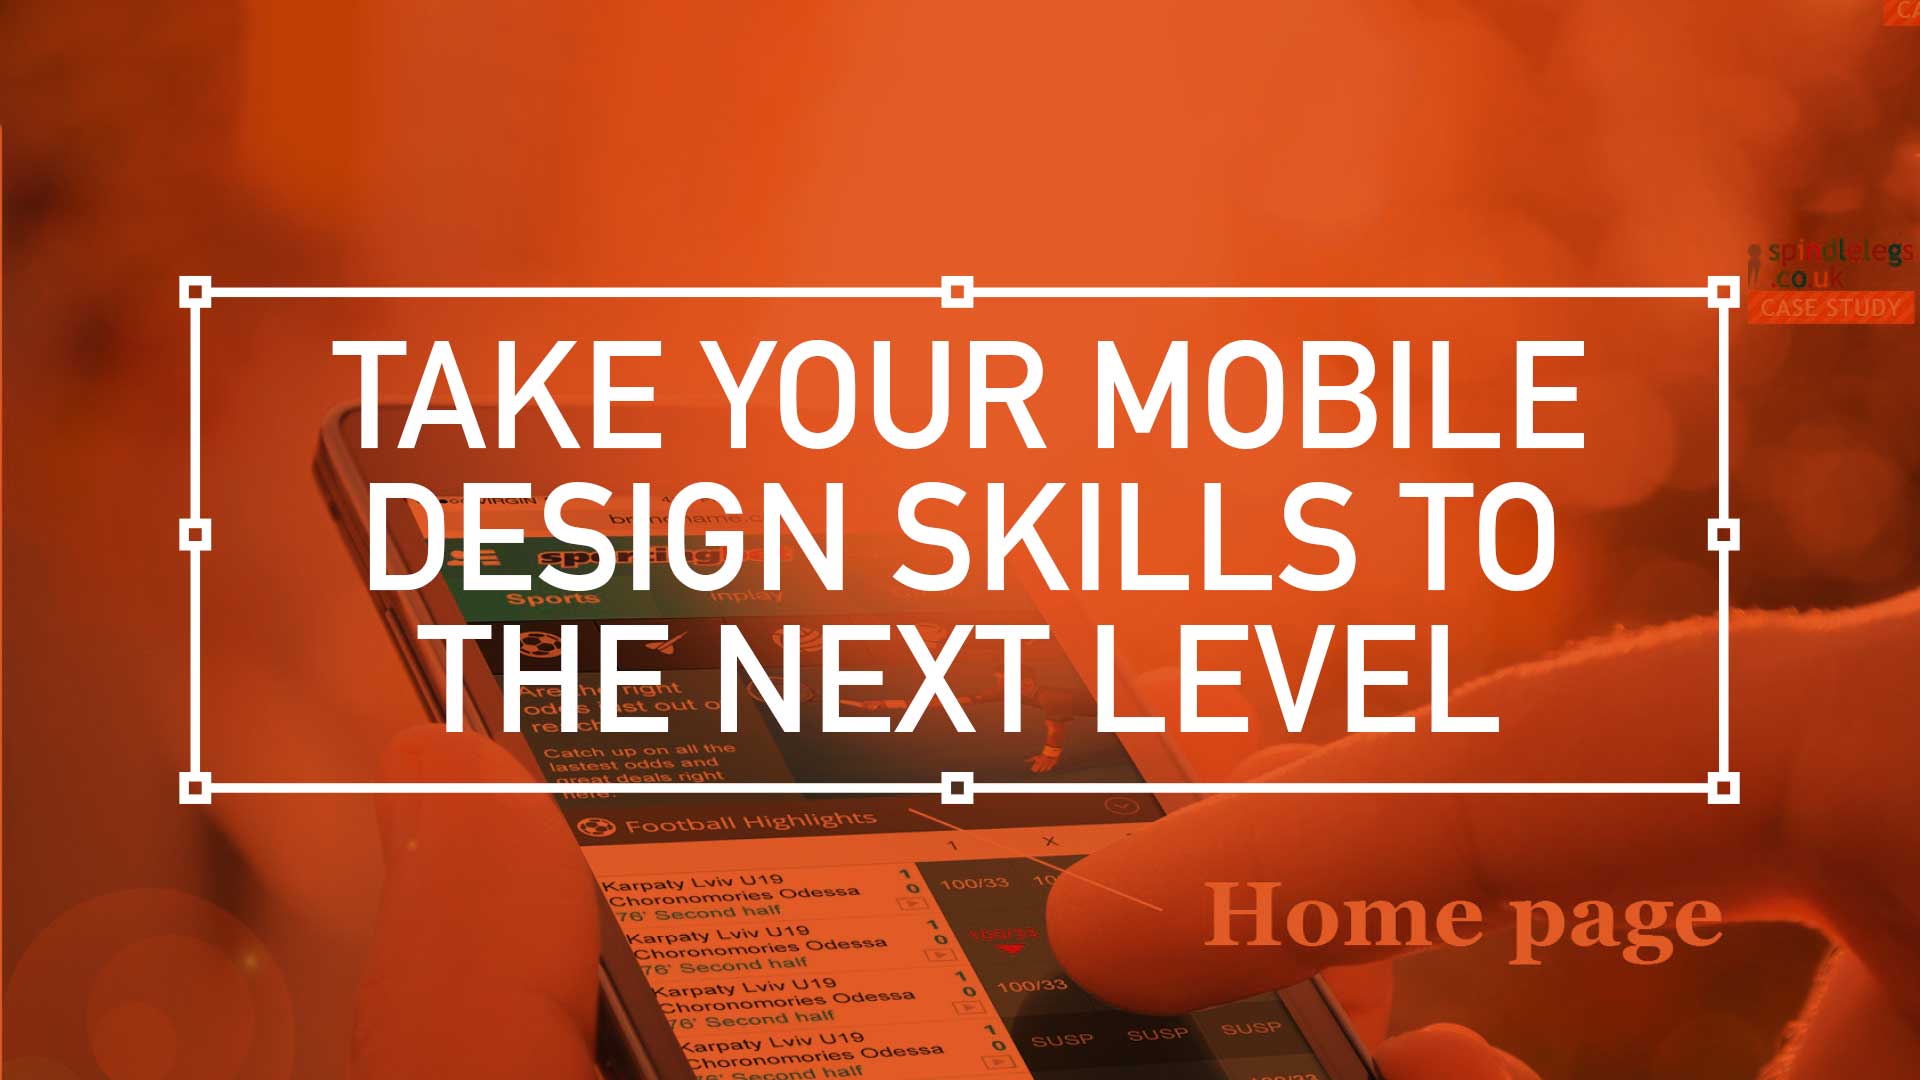 Take your mobile design skills to the next level